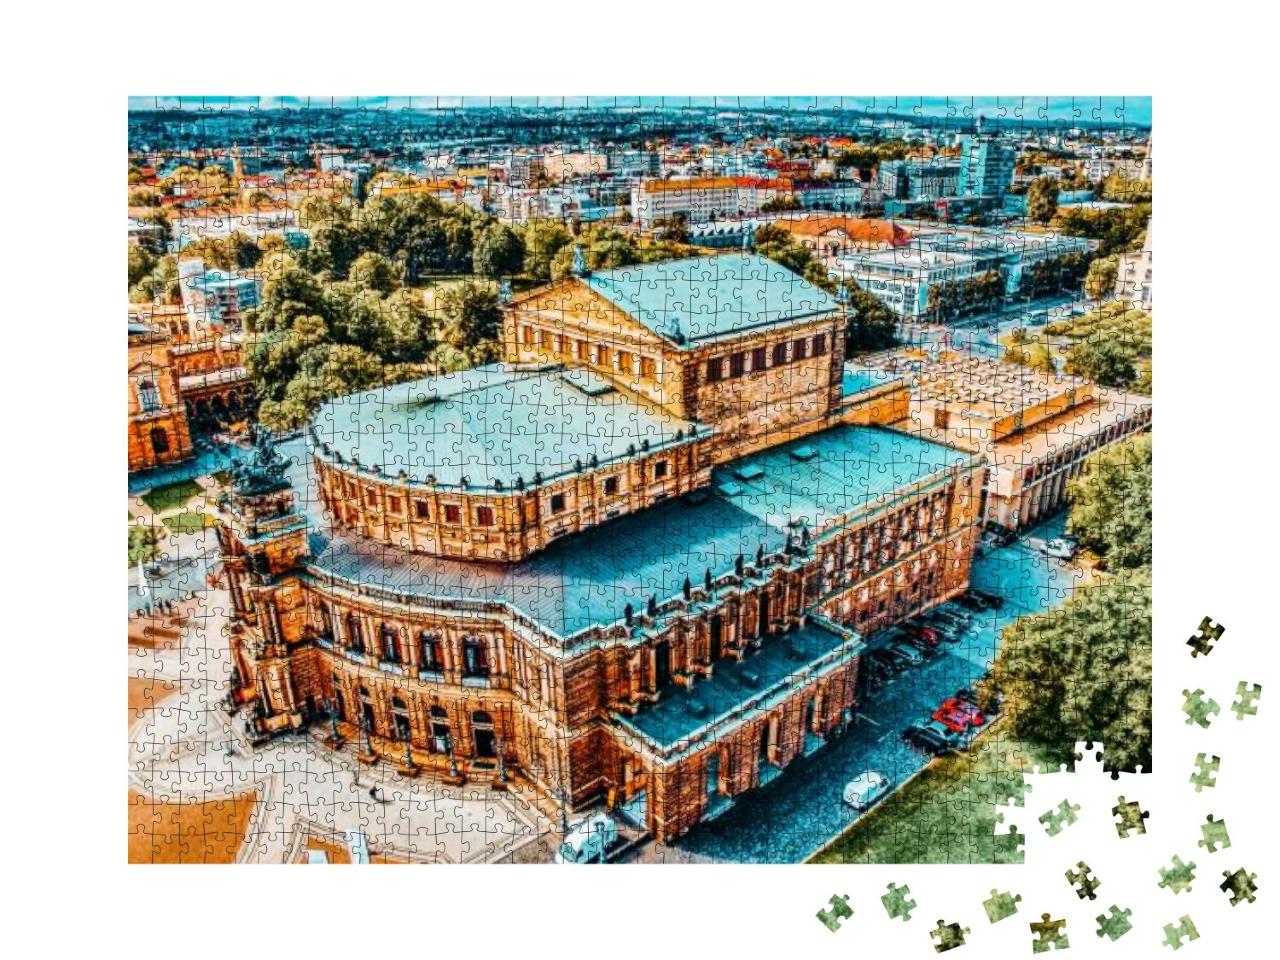 Semperoper is the Opera House of the Sachsische Staatsope... Jigsaw Puzzle with 1000 pieces